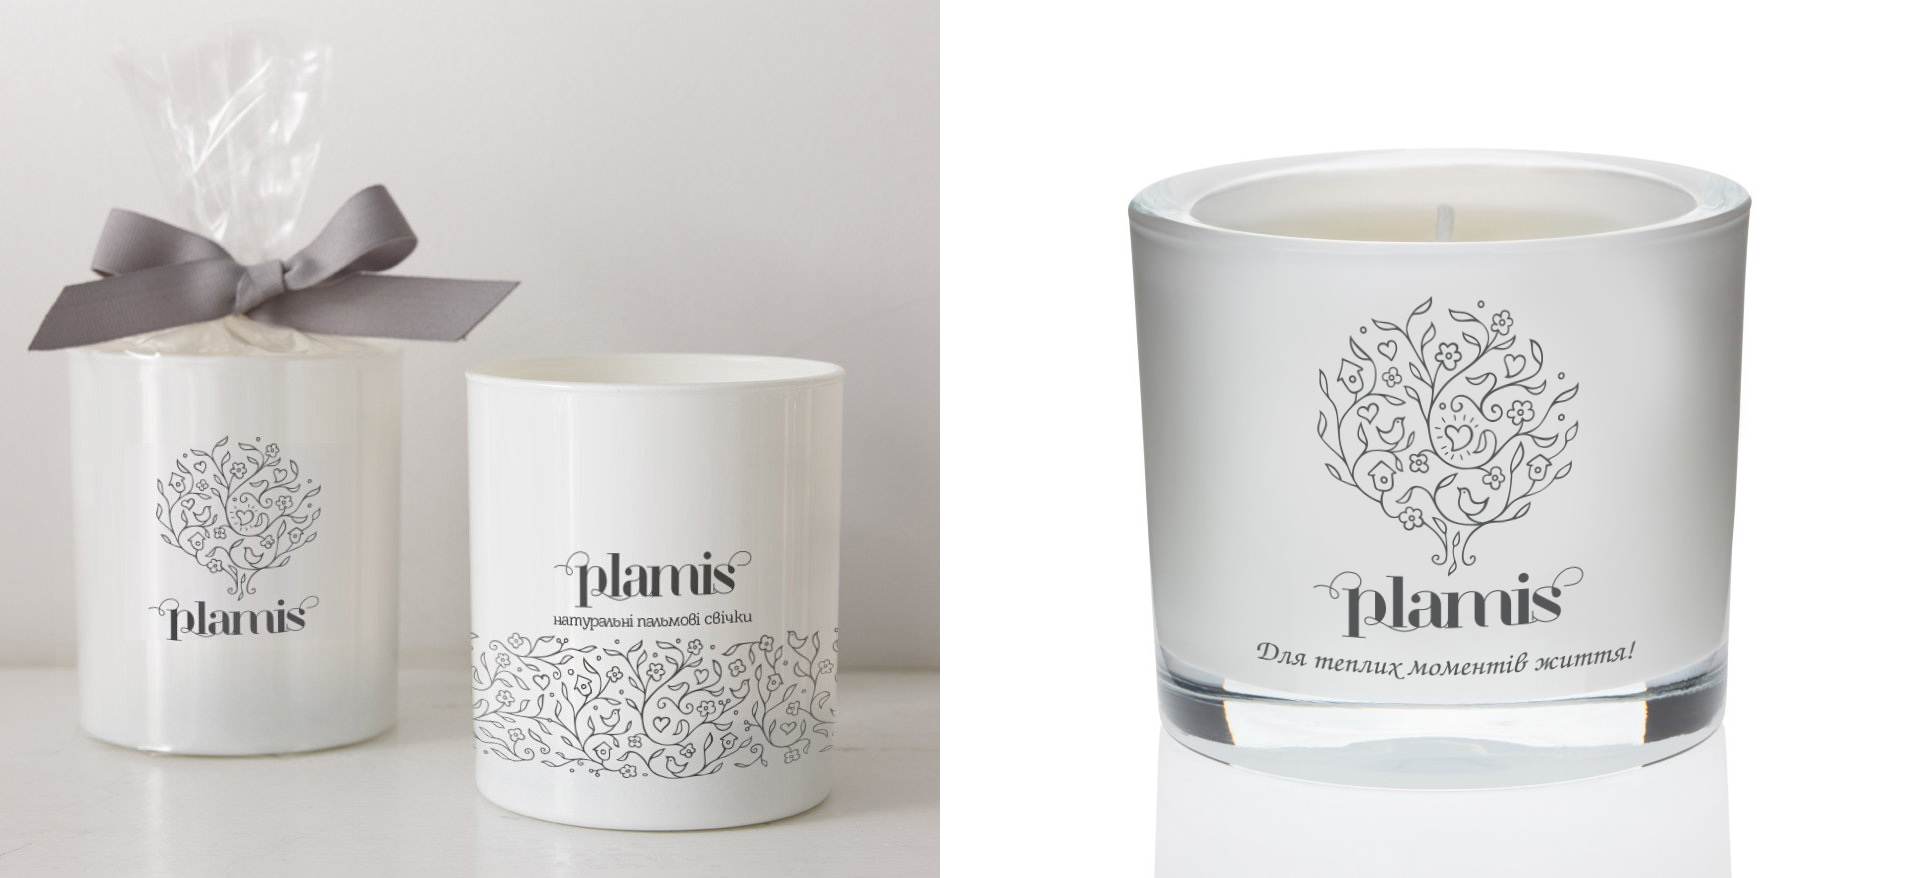 Candle packaging design